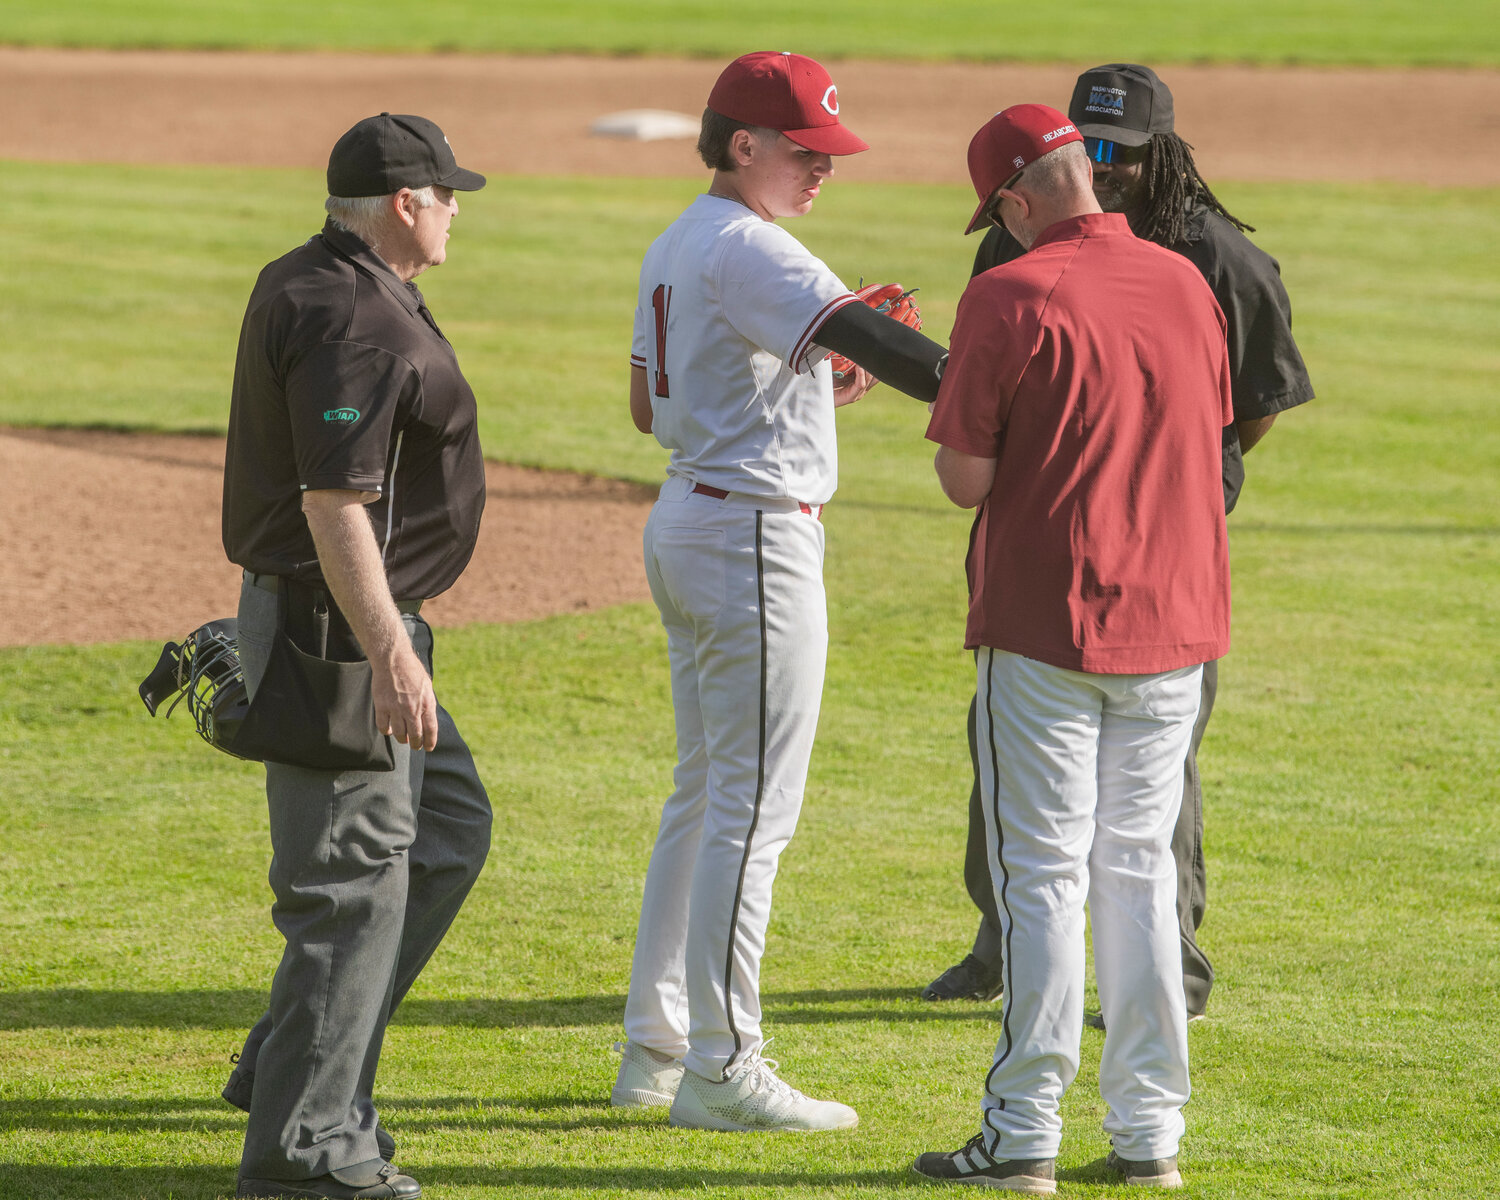 W.F. West coaching staff makes an adjustment to Riggs Westlund’s sleeve before he was able to pitch, as requested by the opposing team, during a game against Mark Morris at Bearcat Stadium in Chehalis on Tuesday, May 9.